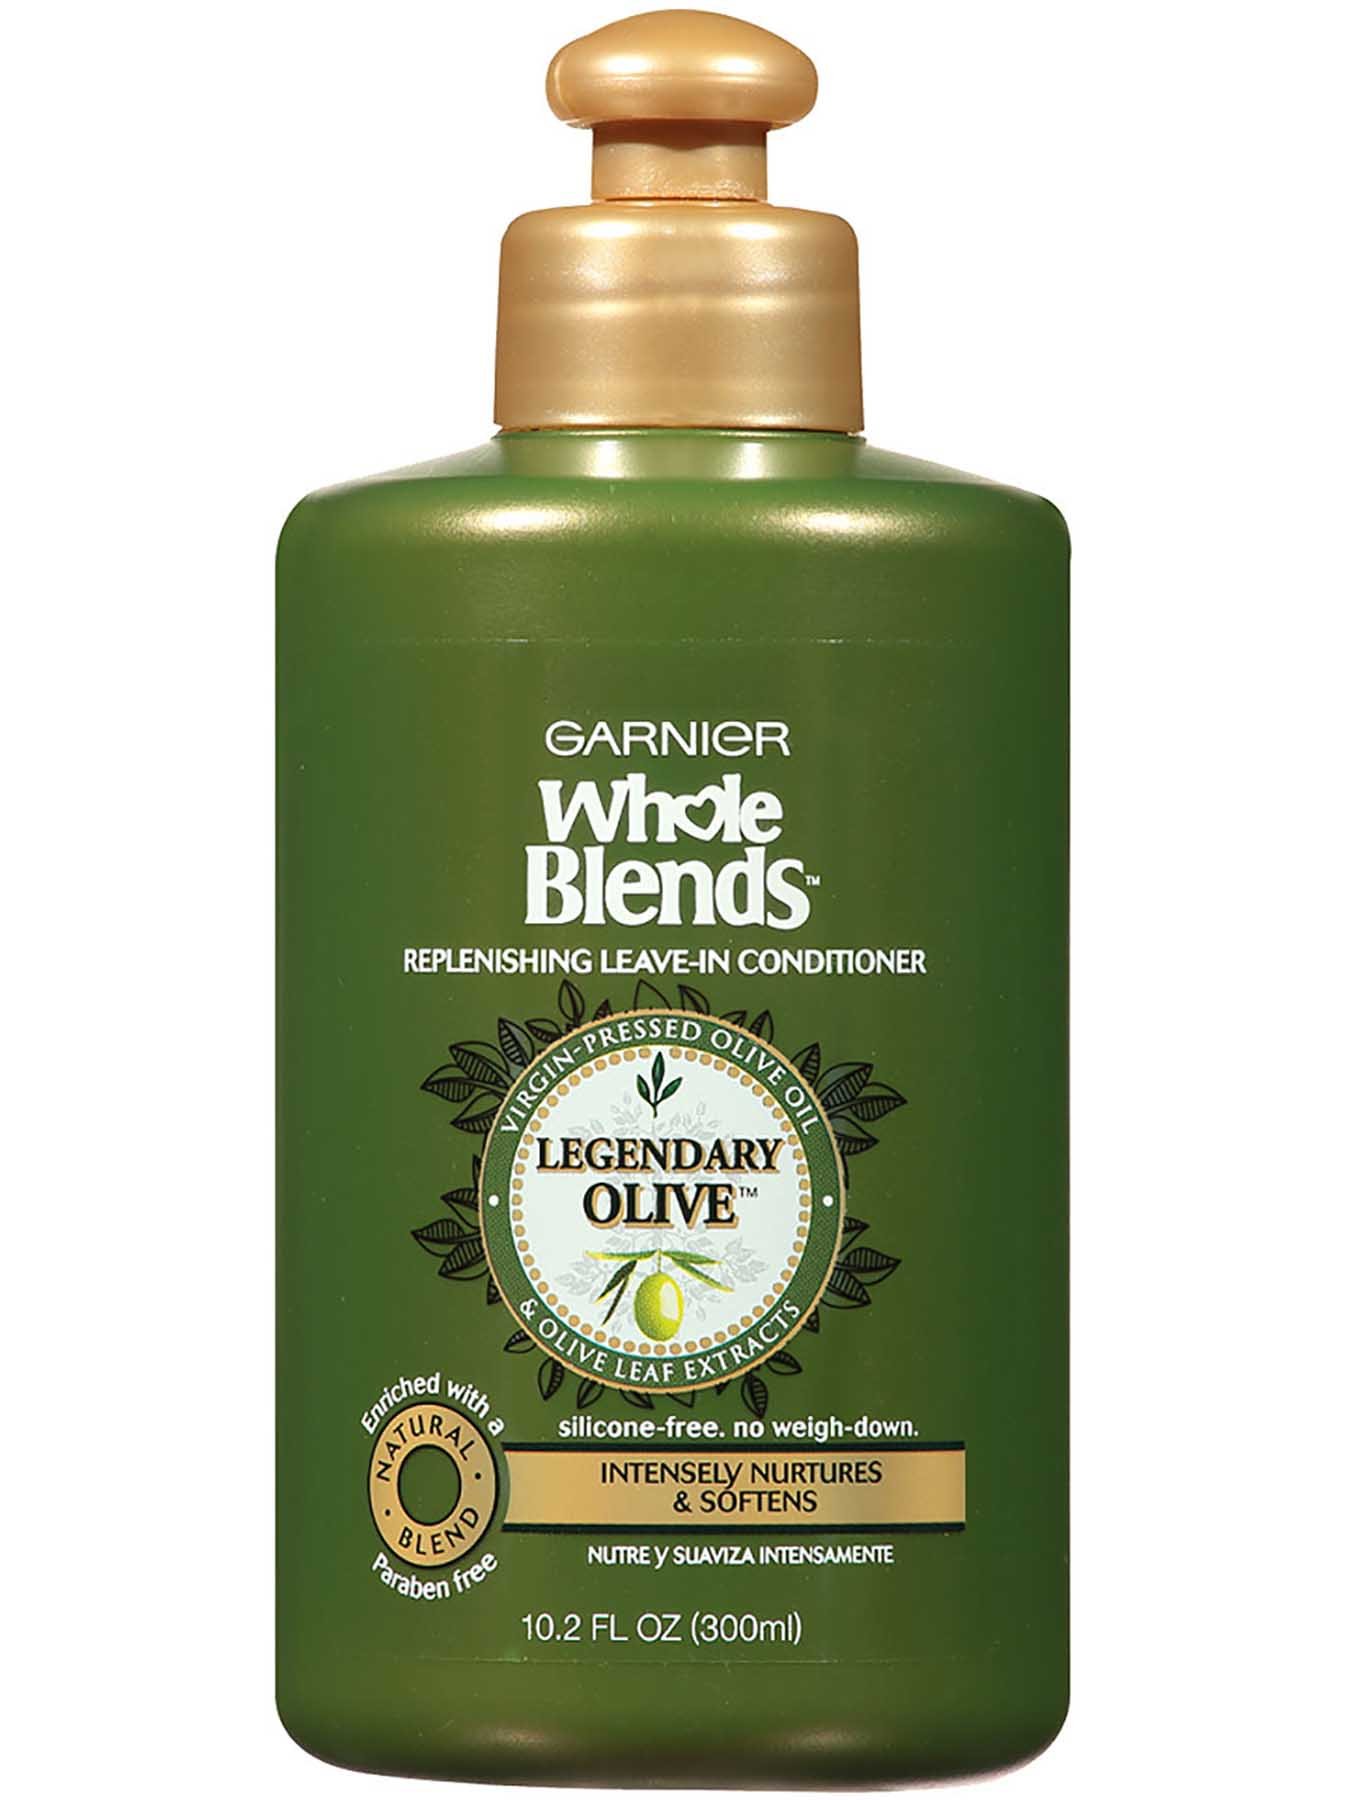 Front view of Replenishing Leave-In Conditioner with Legendary Virgin-Pressed Olive Oil and Olive Leaf Extracts.